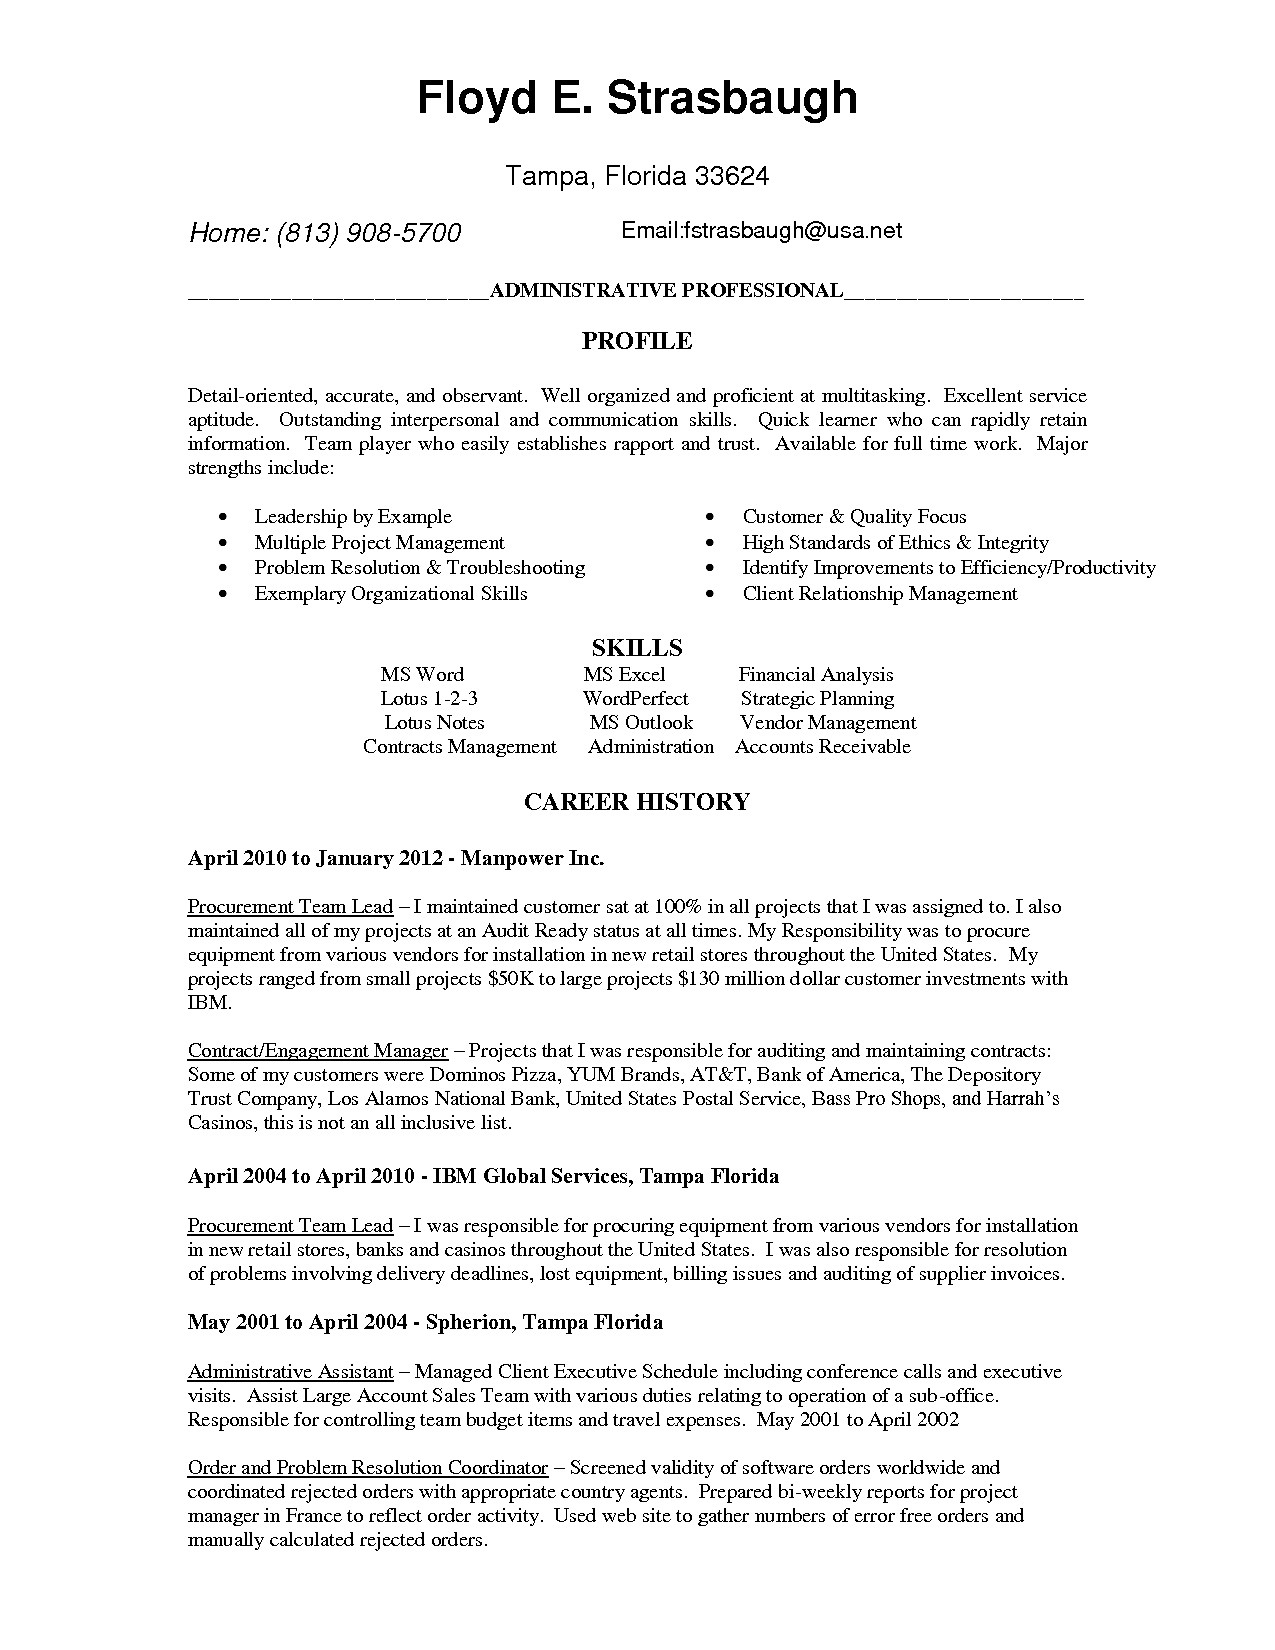 Personal assistant Cover Letter Template - Administrative assistant Cover Letter Template Beautiful Business